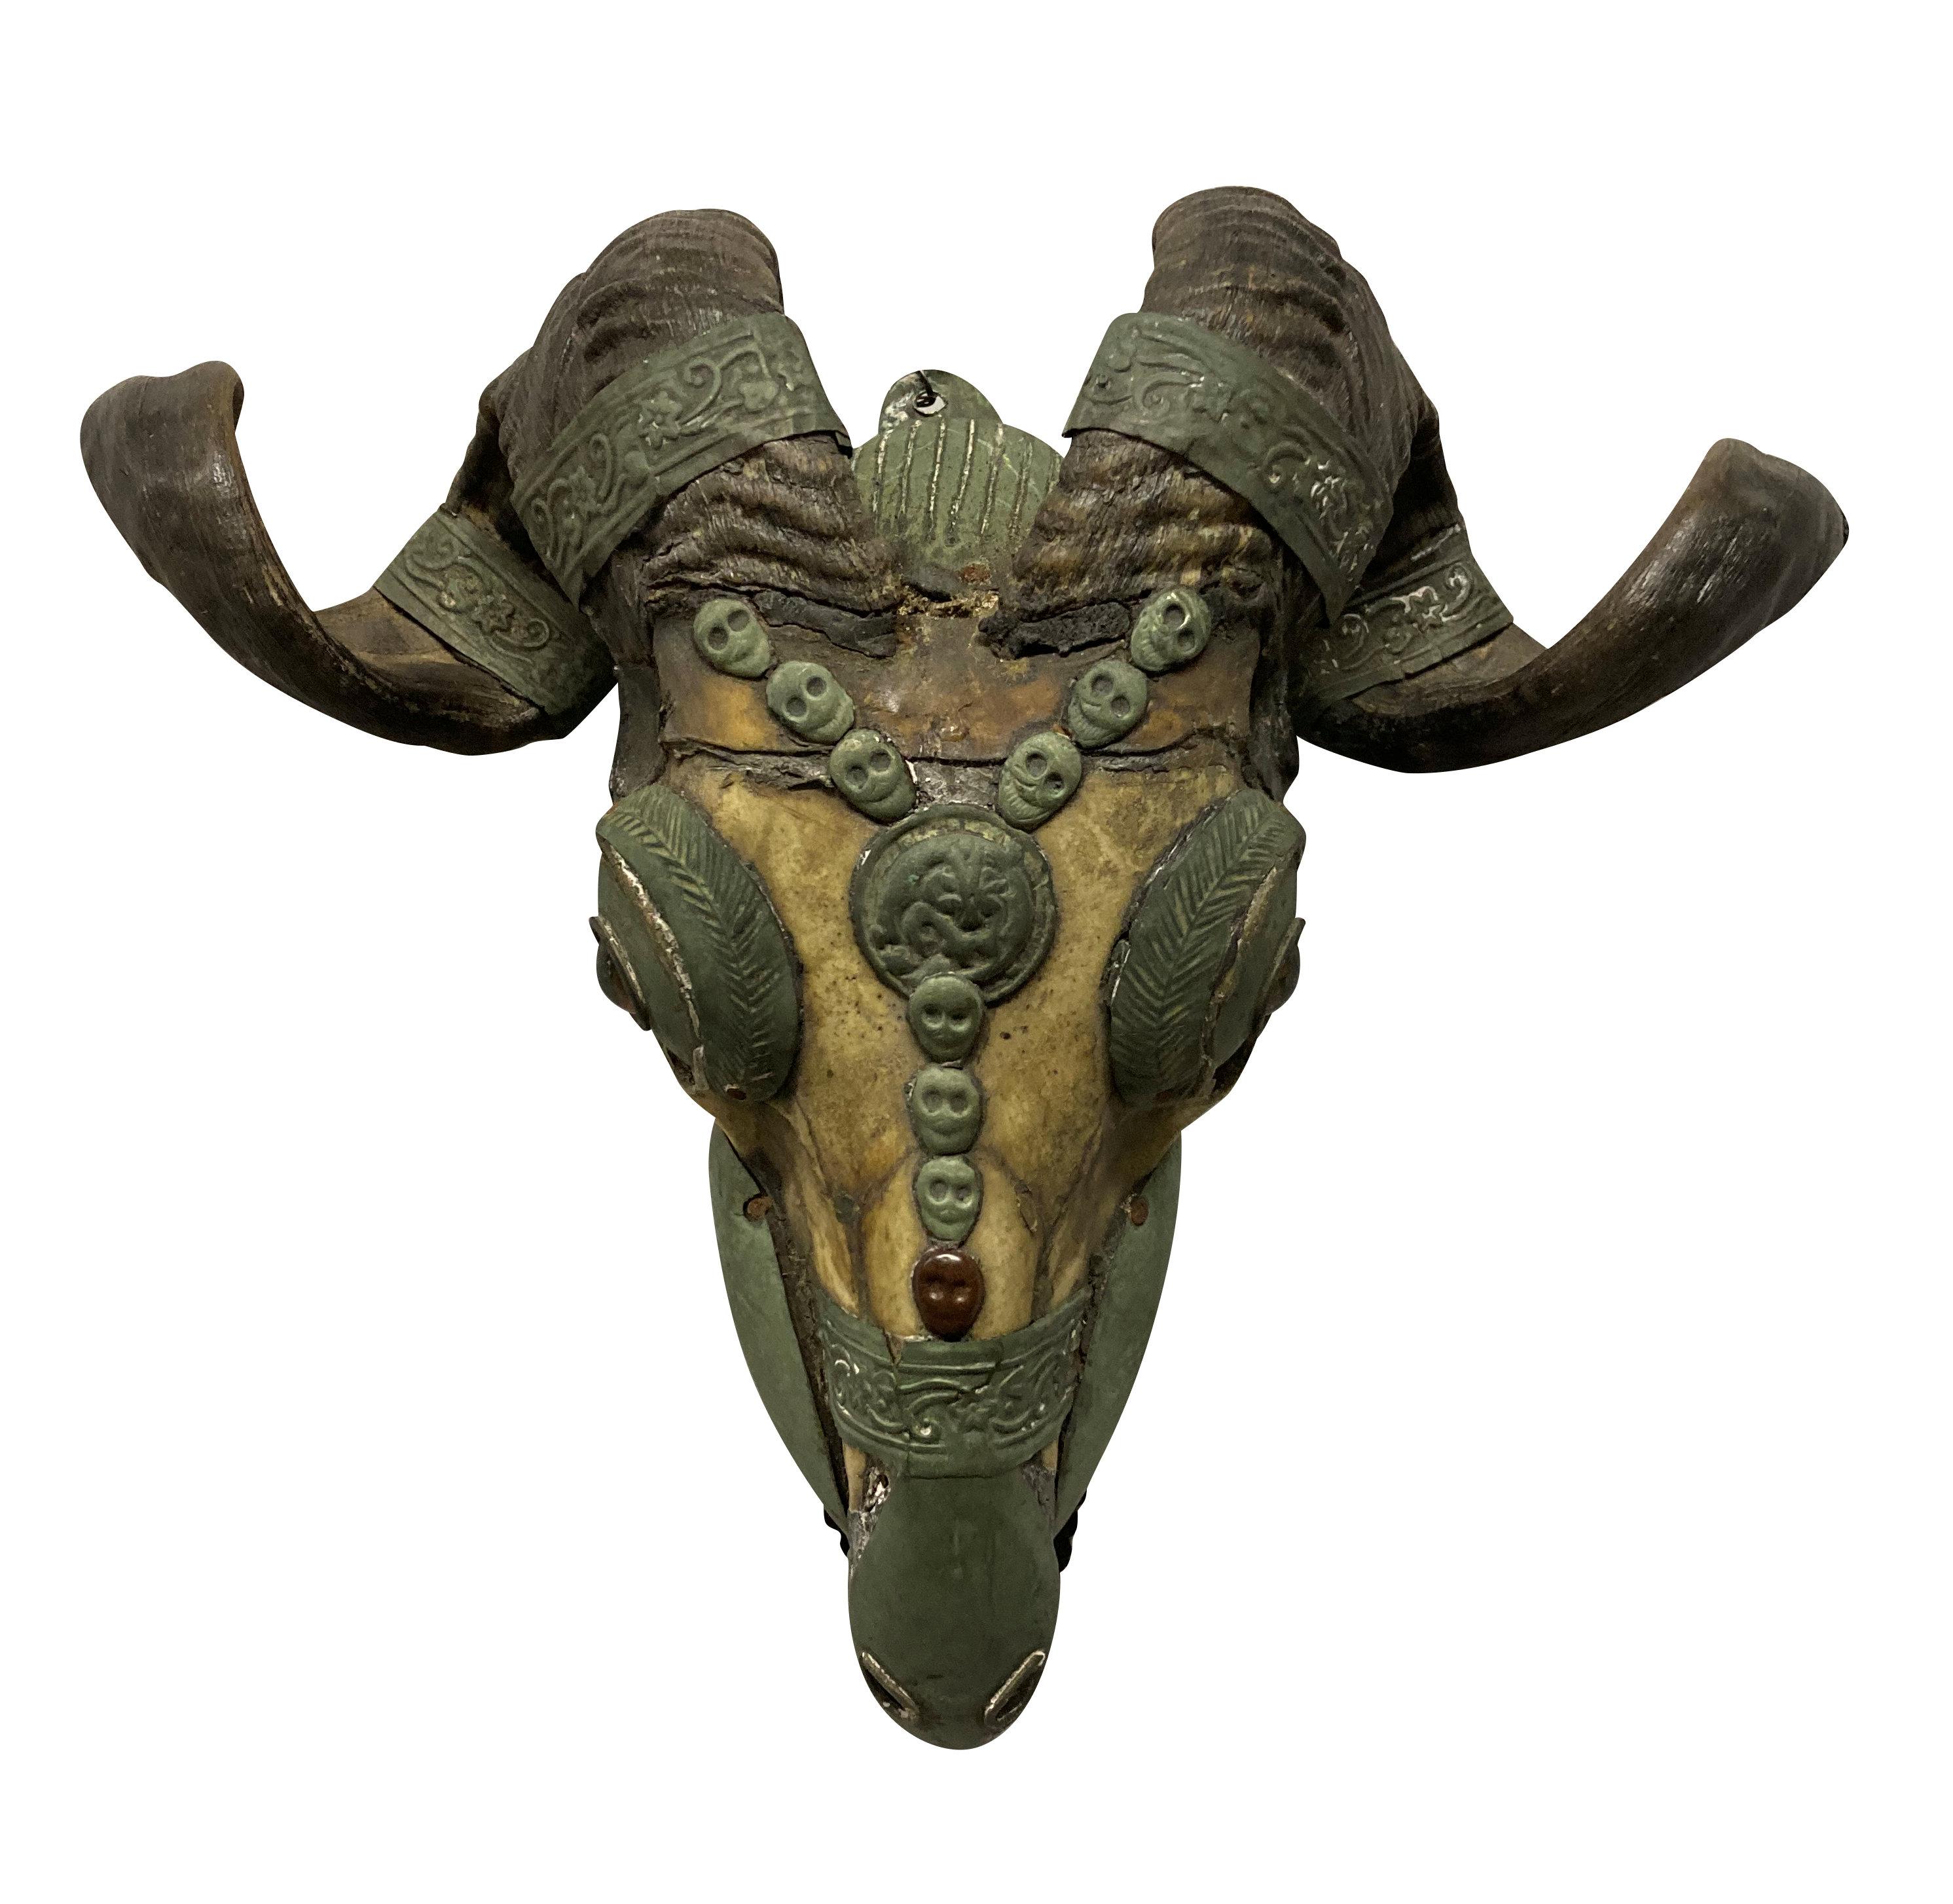 A XIX century Tibetan ceremonial Kapala Goat skull, decorated with silver and copper, articulated jaw, and life-like glass eyes. These items were used by Buddhist Tantra practising monks.